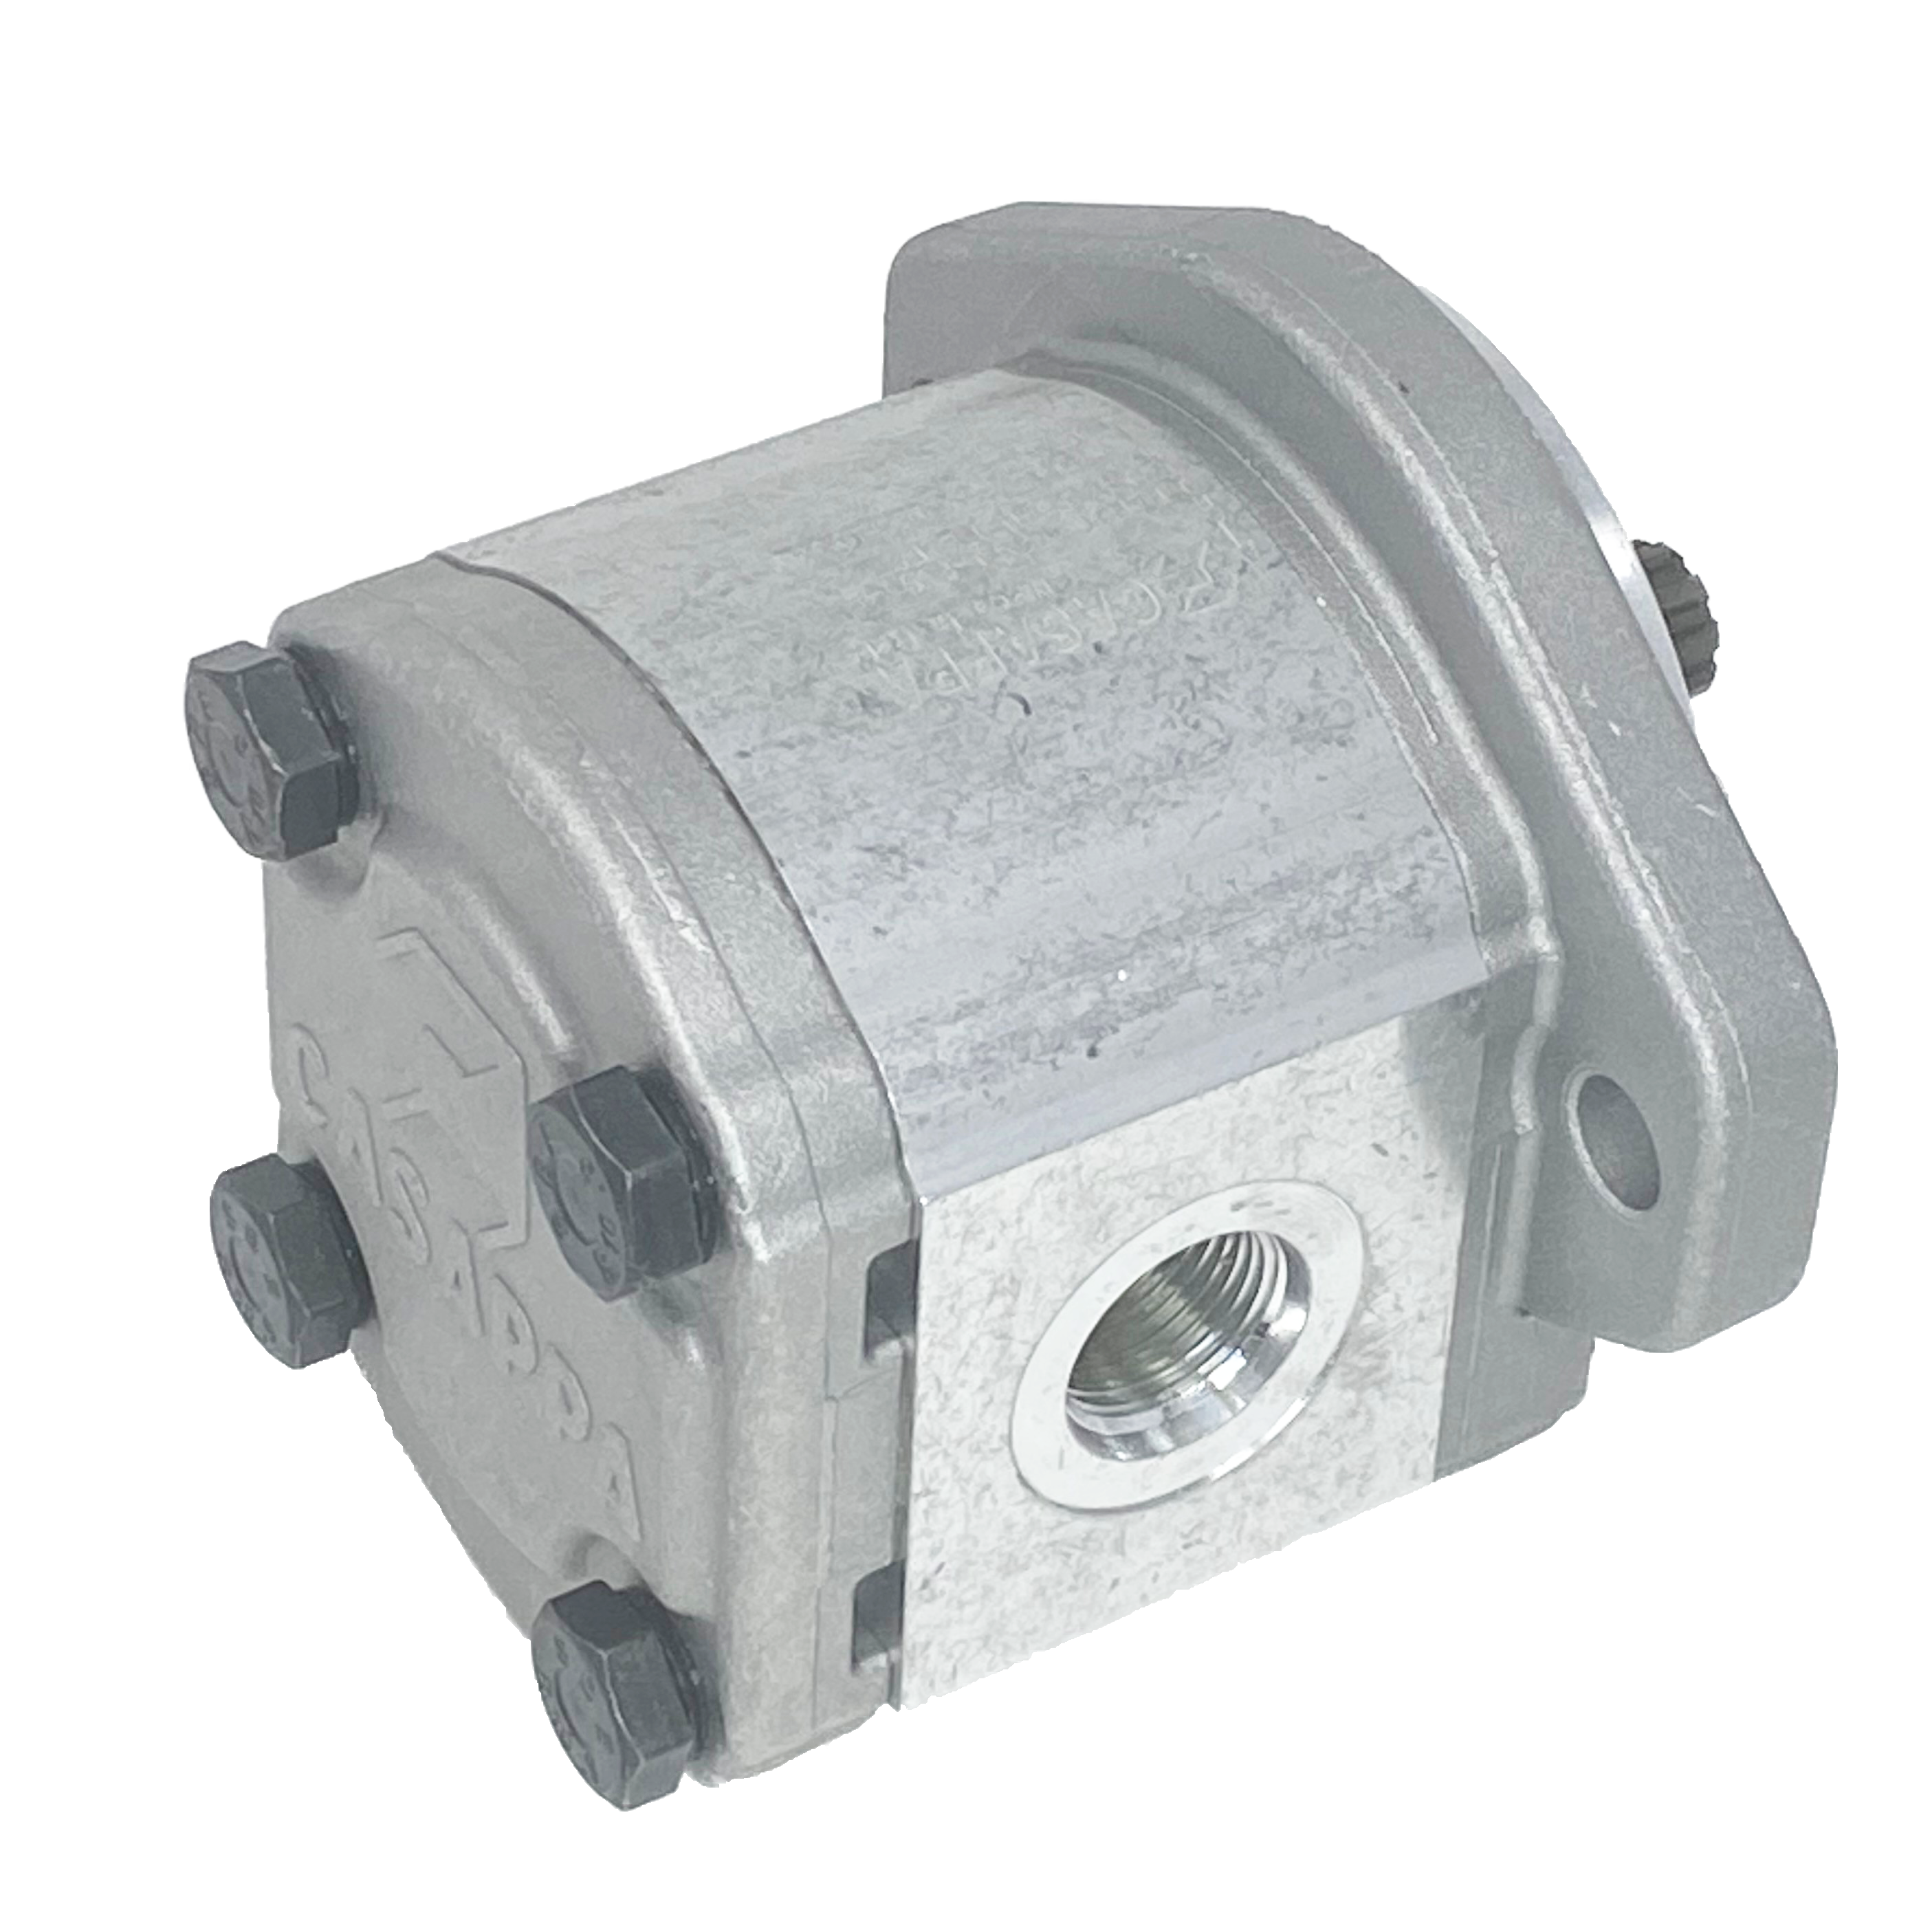 PLP20.4S0-49S1-LOF/OC-S7-N-EL-FS : Casappa Polaris Gear Pump, 4.95cc, 3625psi Rated, 4000RPM, CCW, 5/8" Keyed Shaft, SAE A 2-Bolt Flange, 1" #16 SAE Inlet, 0.625 (5/8") #10 SAE Outlet, Aluminum Body & Flange